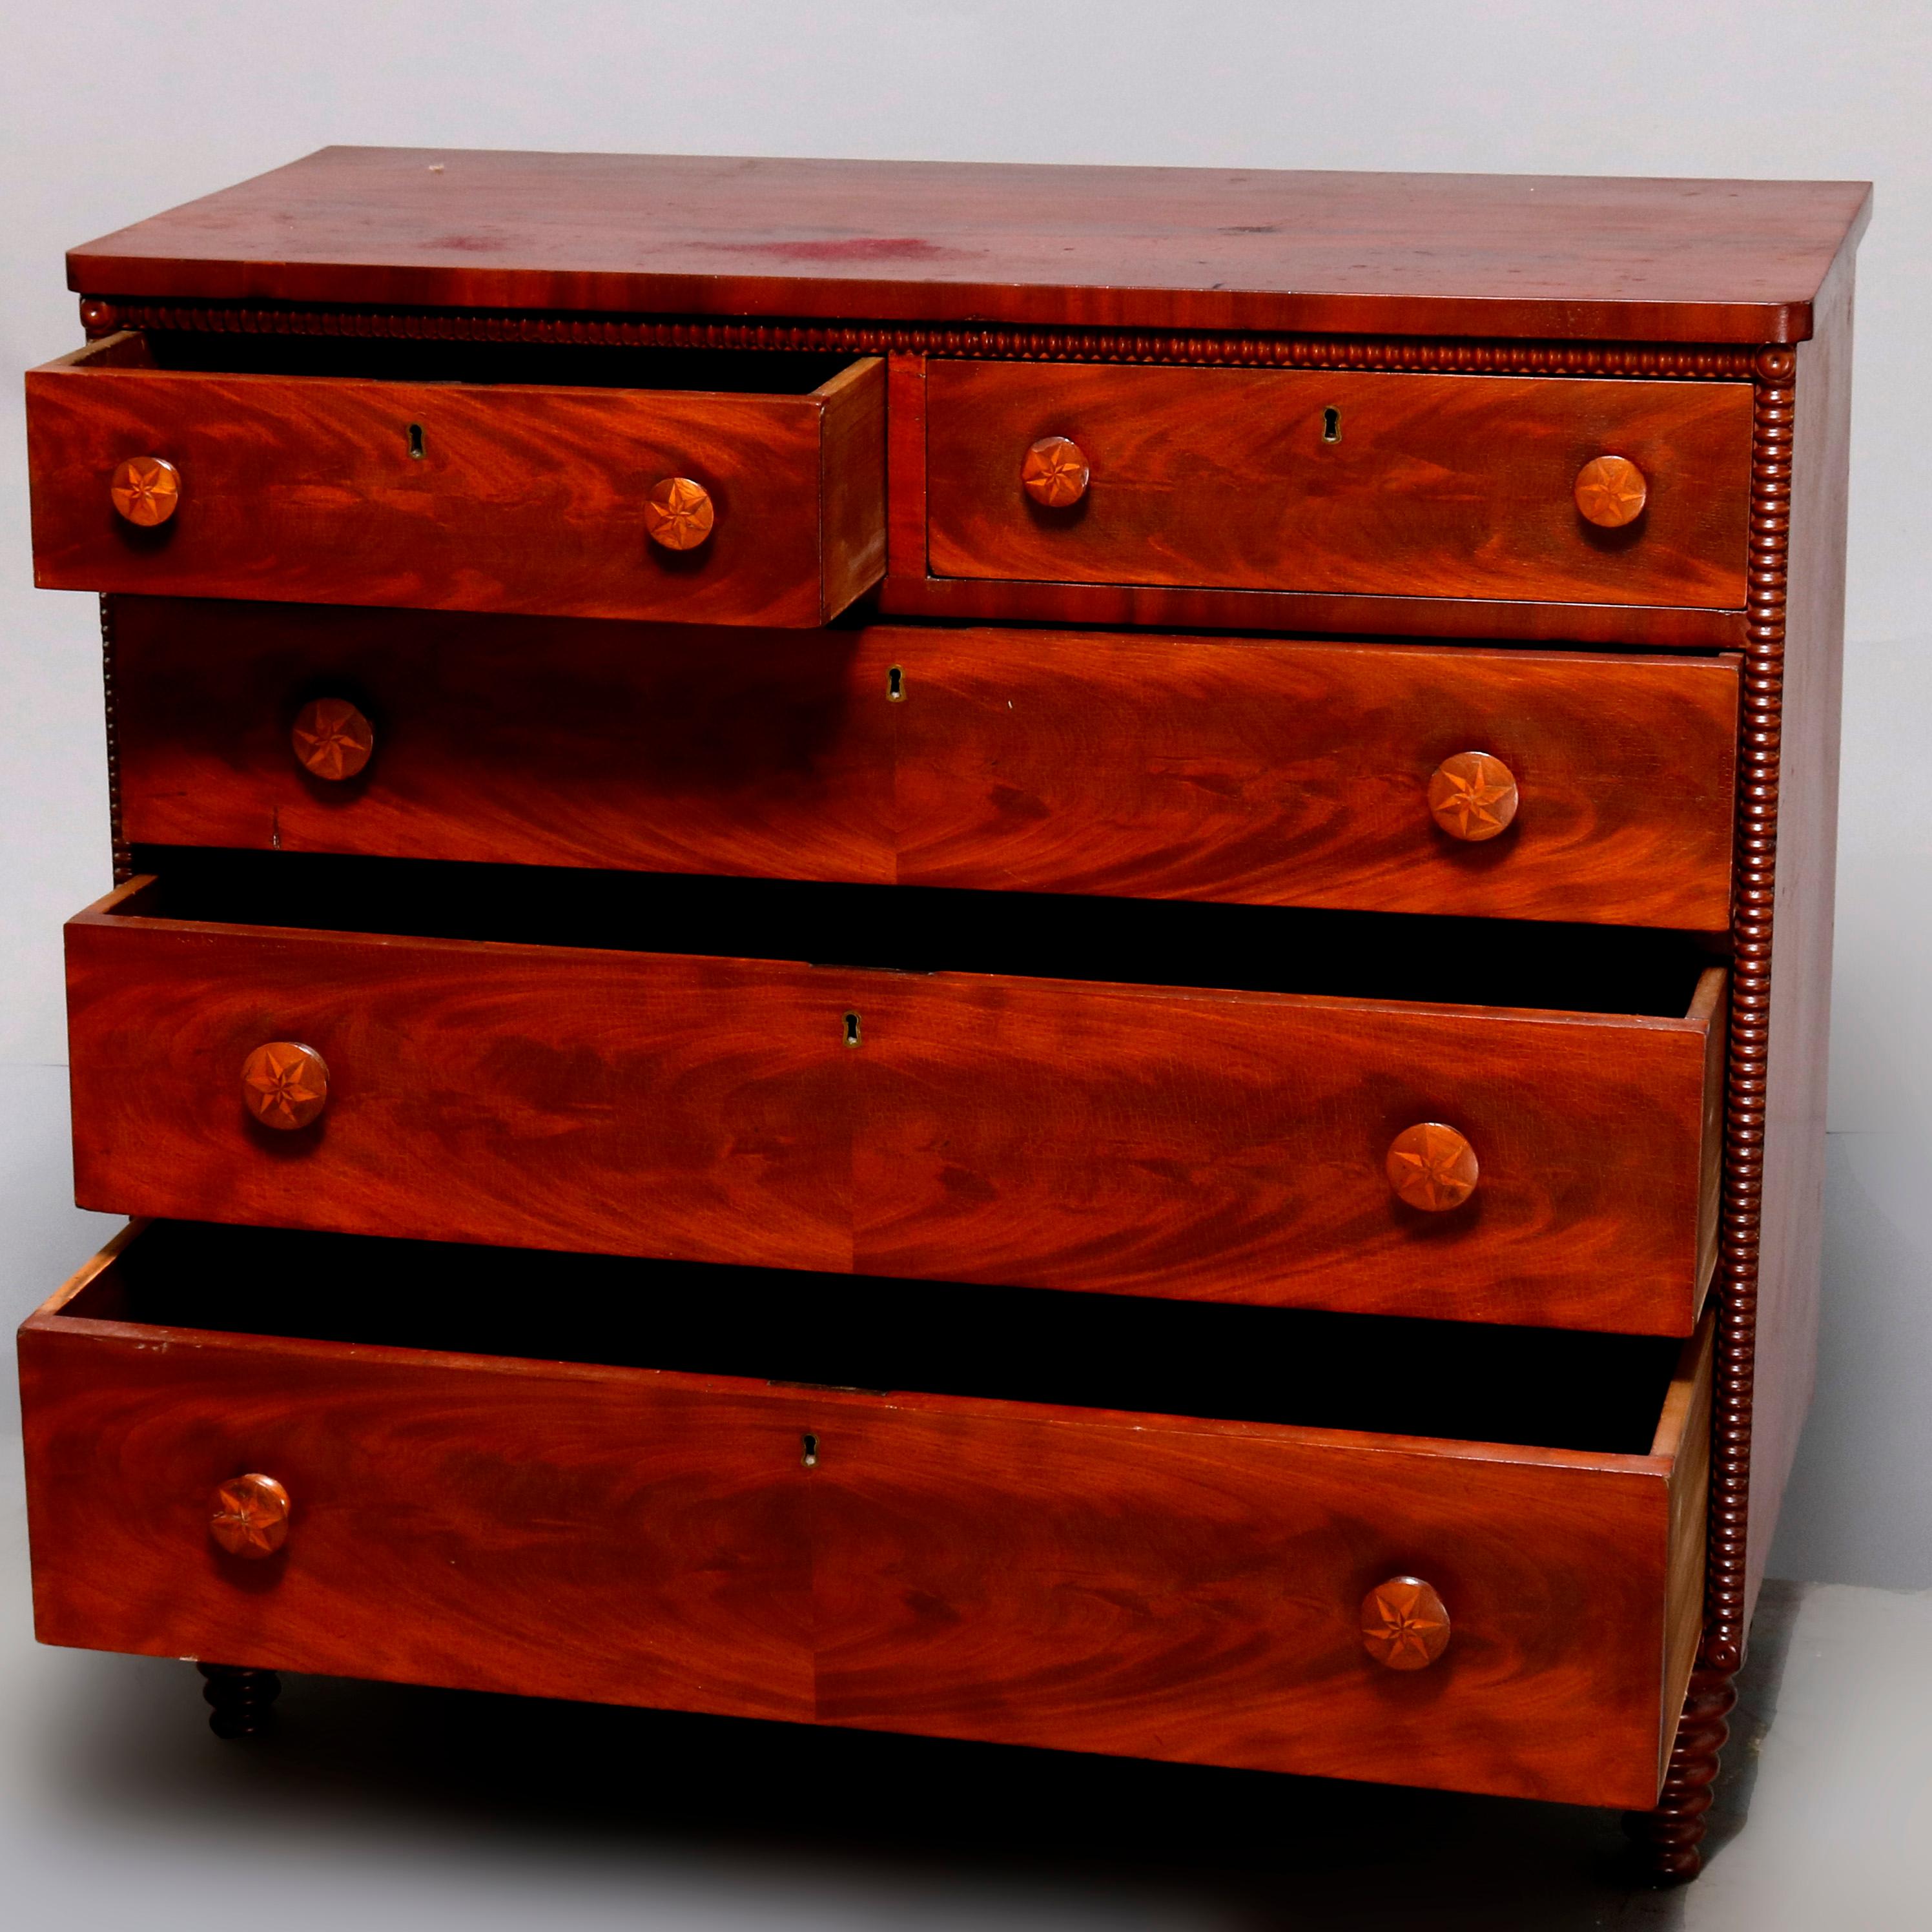 An antique Sheraton flame mahogany Folk Art chest of drawers offers case with spool carved border surrounding two small upper drawers over three long drawers, all with bookmatched facing and satinwood parquetry inlaid pulls having star design,